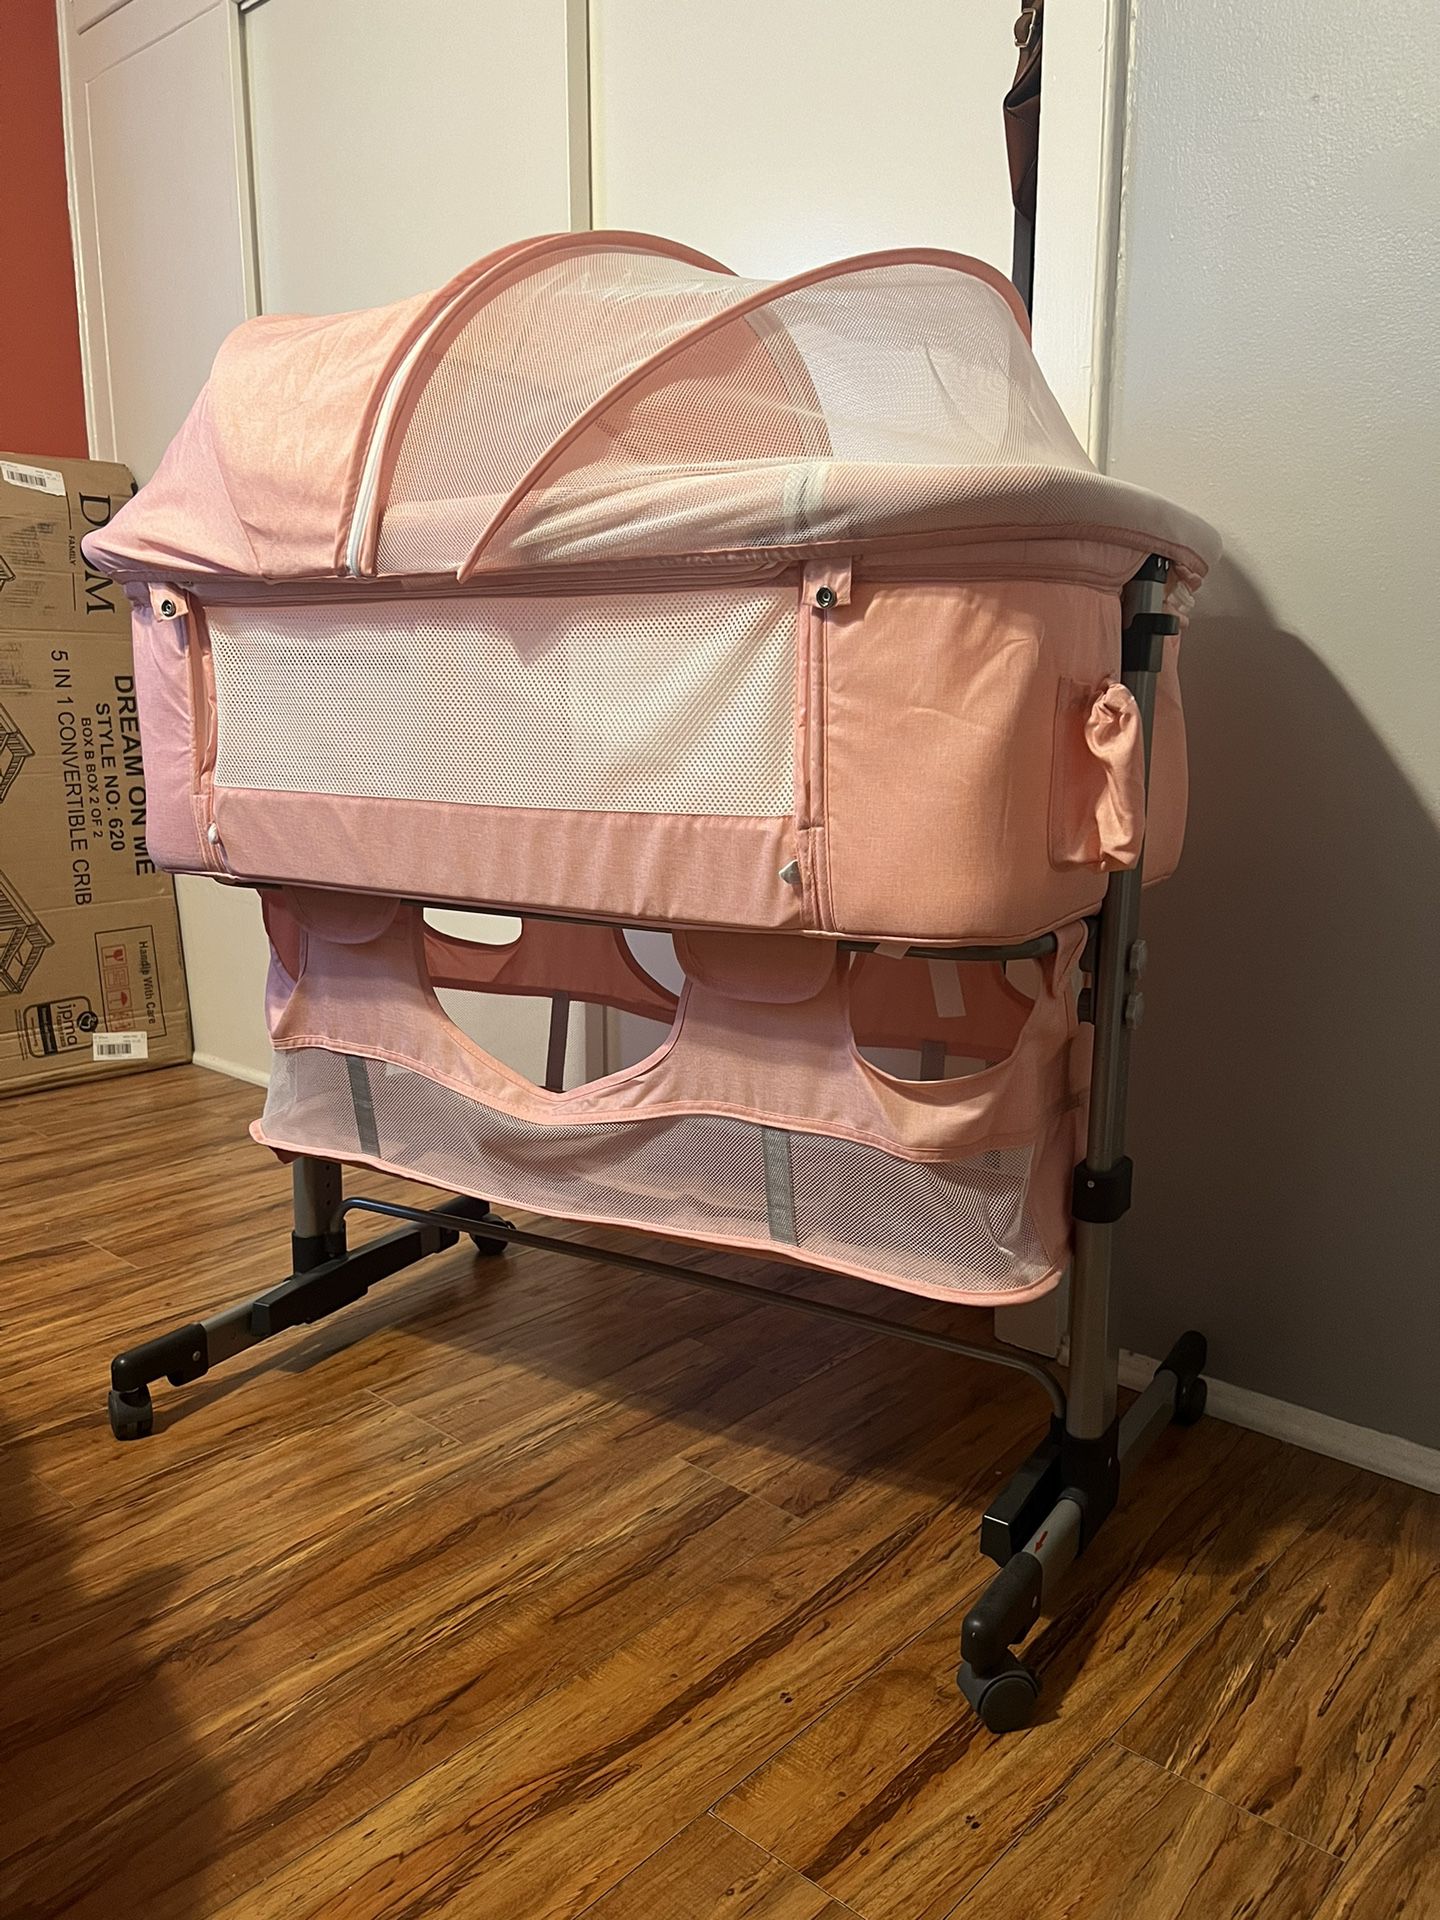 baby crib semi new. in good conditions